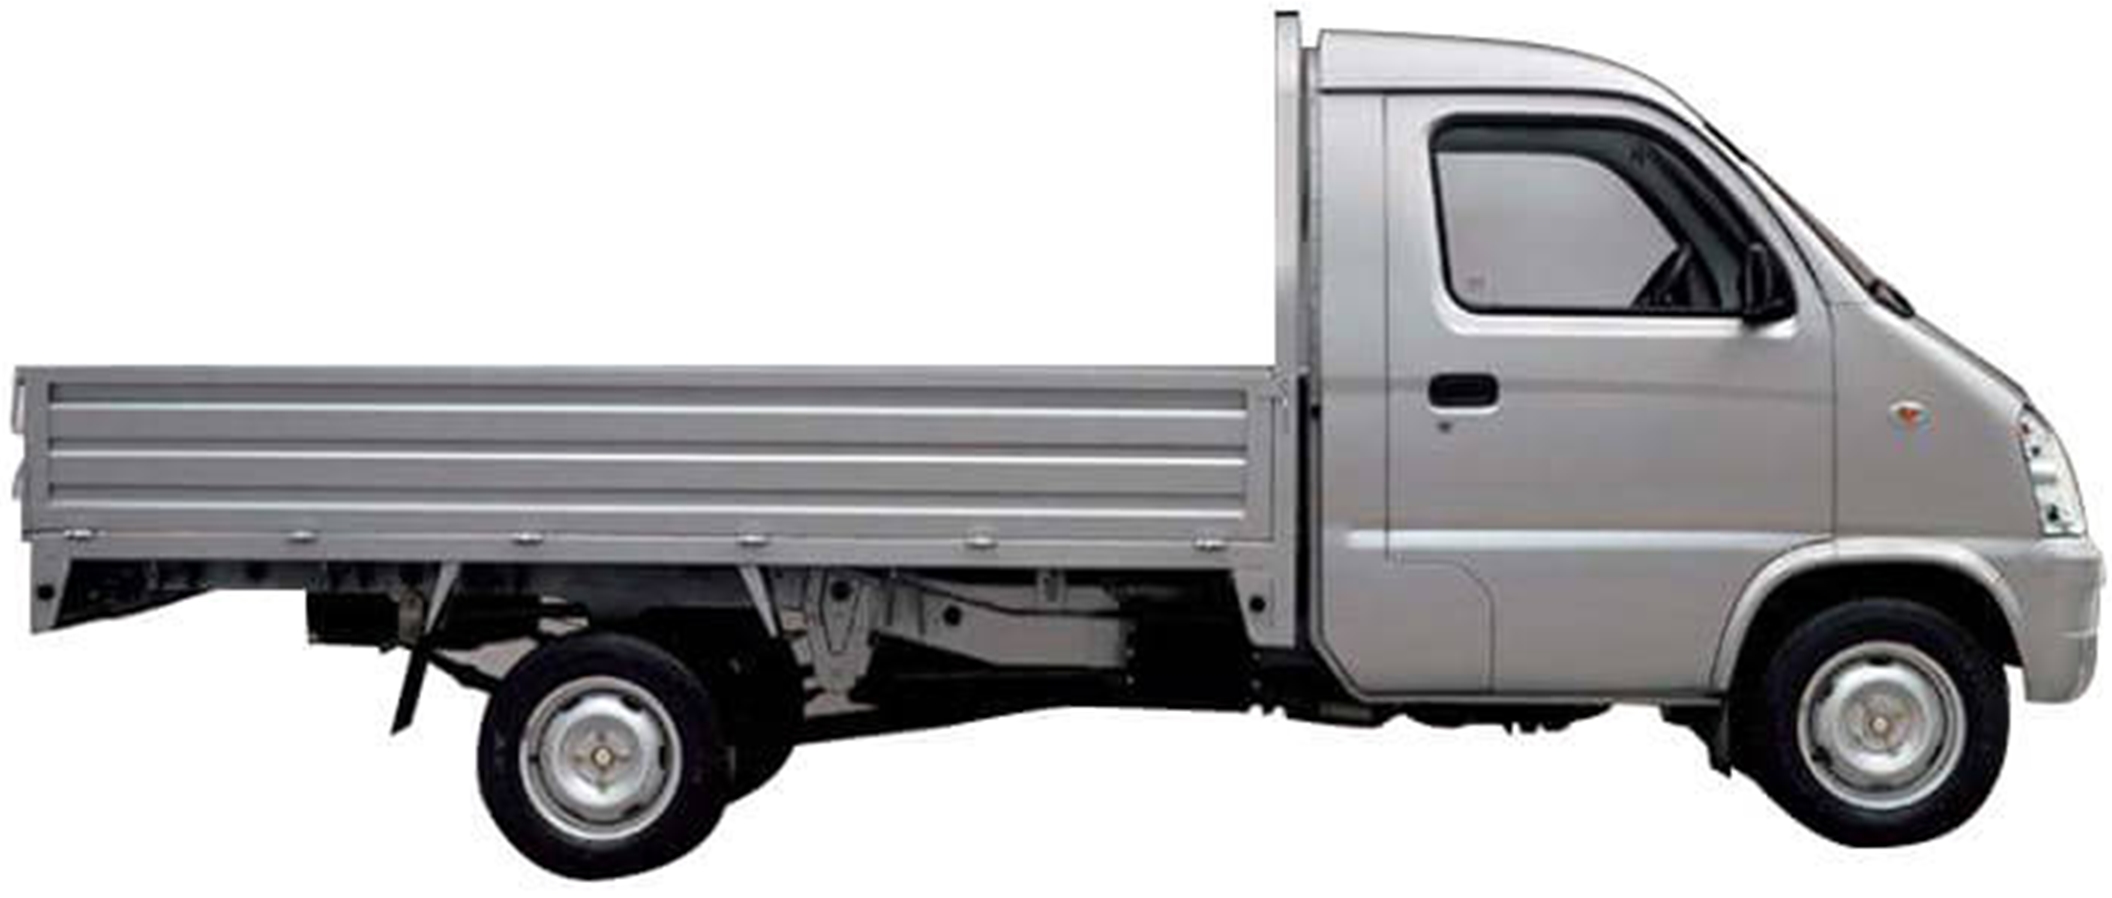 FAW Carrier Deckless/Flatbed/Standard Price In Pakistan Images Specs Features